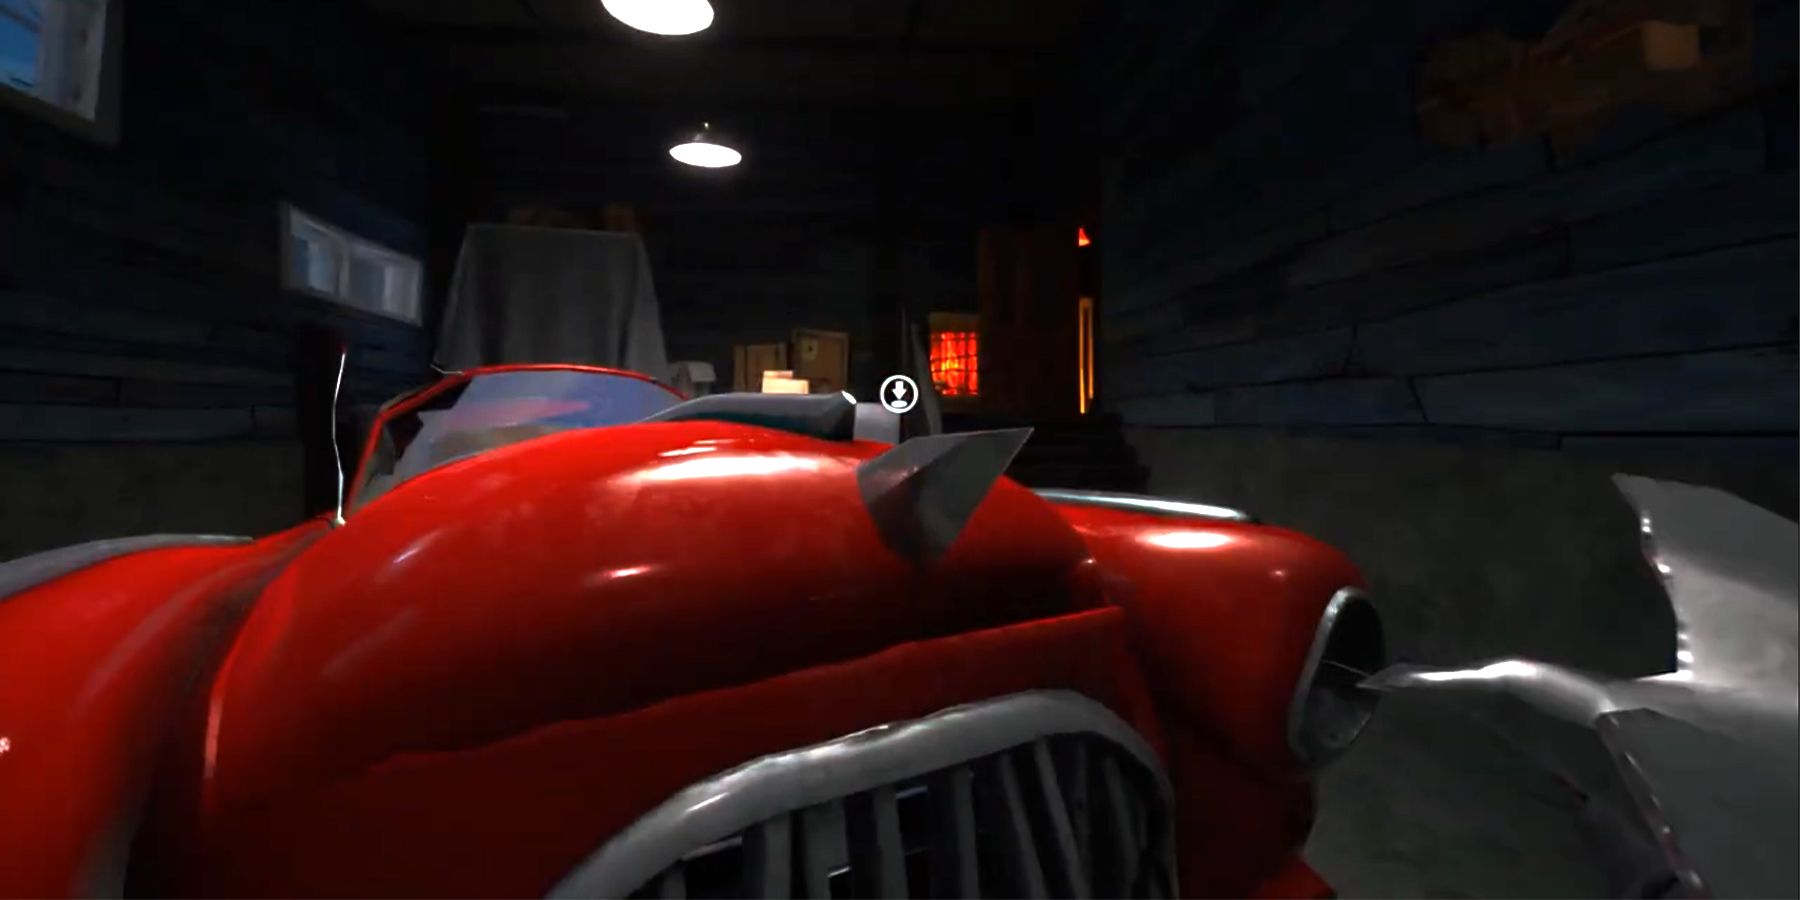 placing the hood ornament on the car's hood in hello neighbor 2